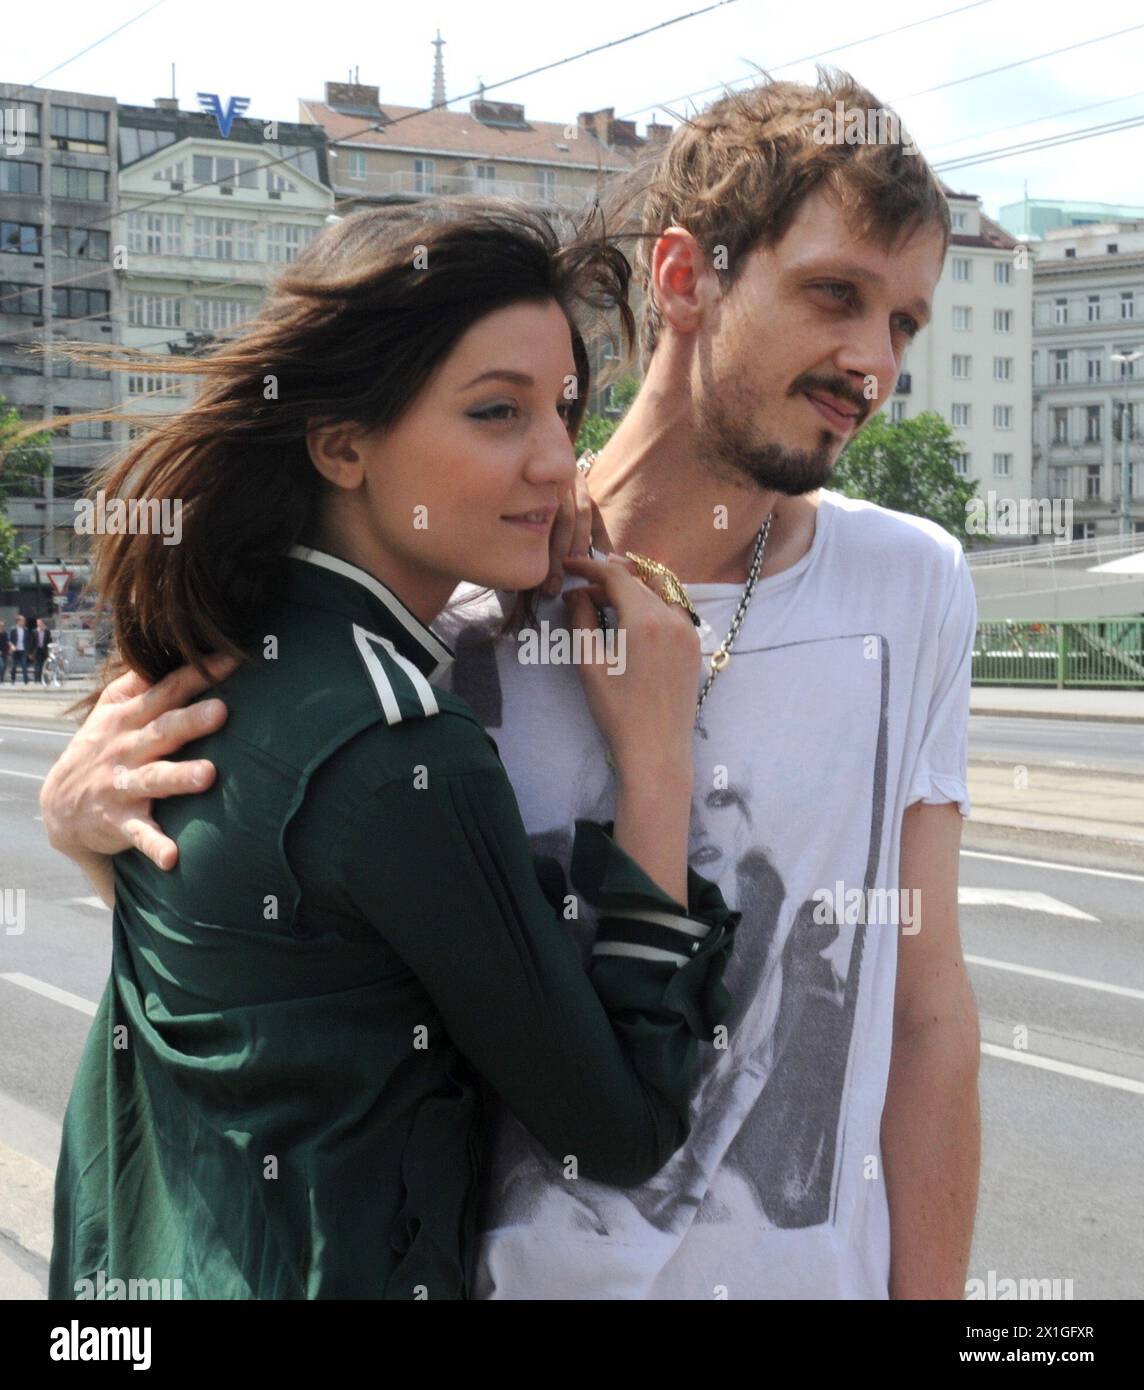 Vienna - Romanian-Canadian model Irina Lazareanu arrives in Vienna for 'festival for fashion & photography' from 29th May-5th June. PICTURE:      Irina Lazareanu and her fiance Keir Knight on 31th May 2012. - 20120531 PD1045 - Rechteinfo: Rights Managed (RM) Stock Photo